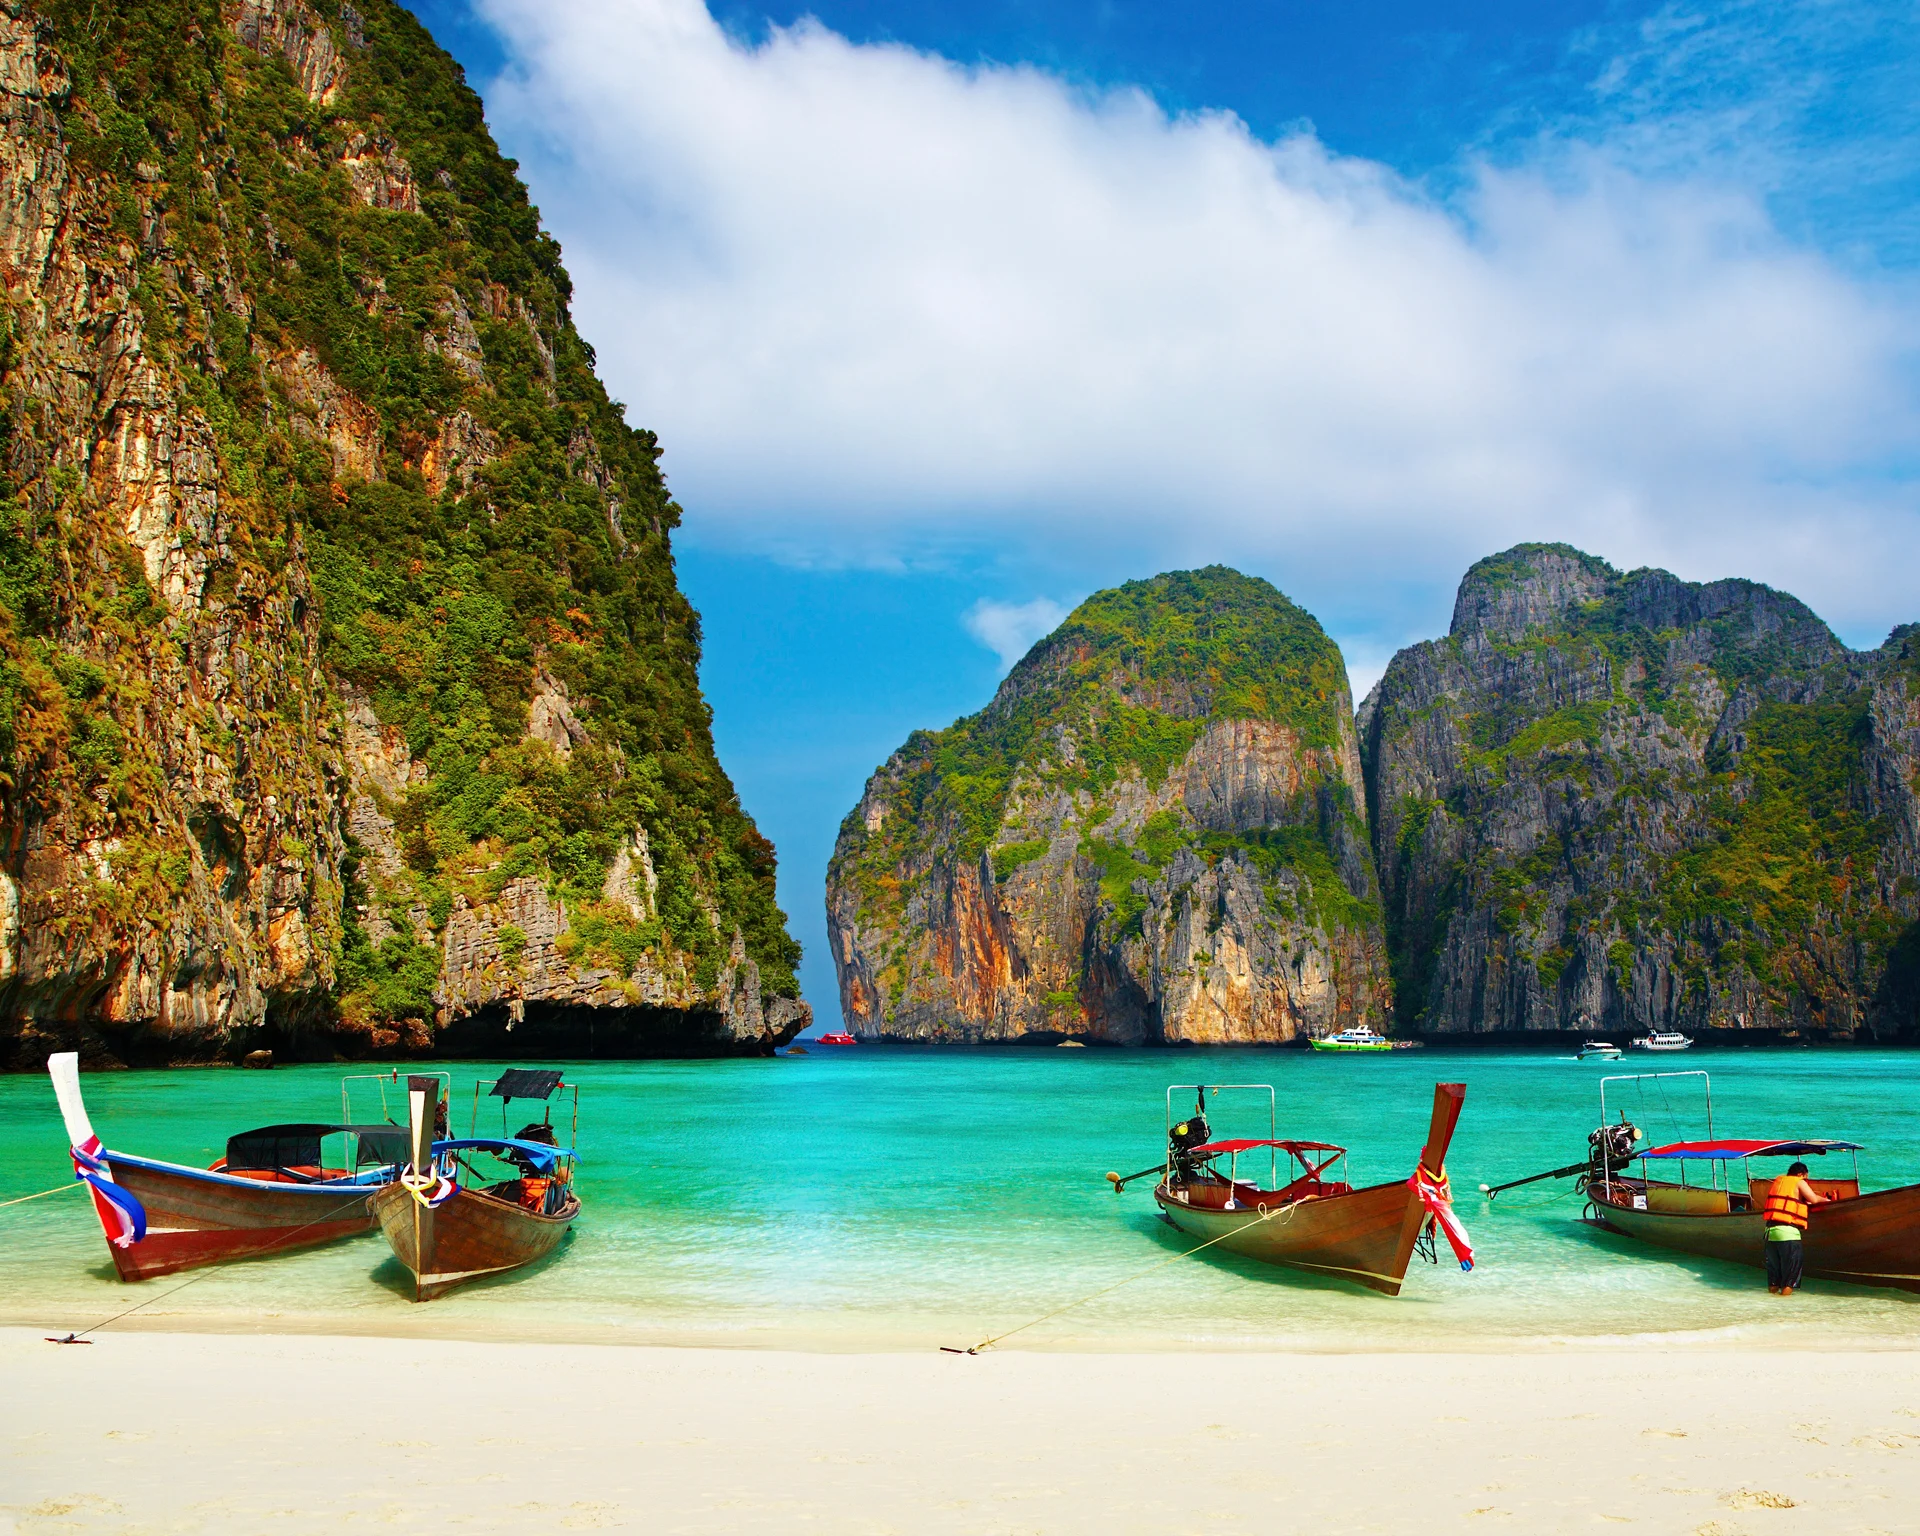 Thailand beach and boats towering rocks